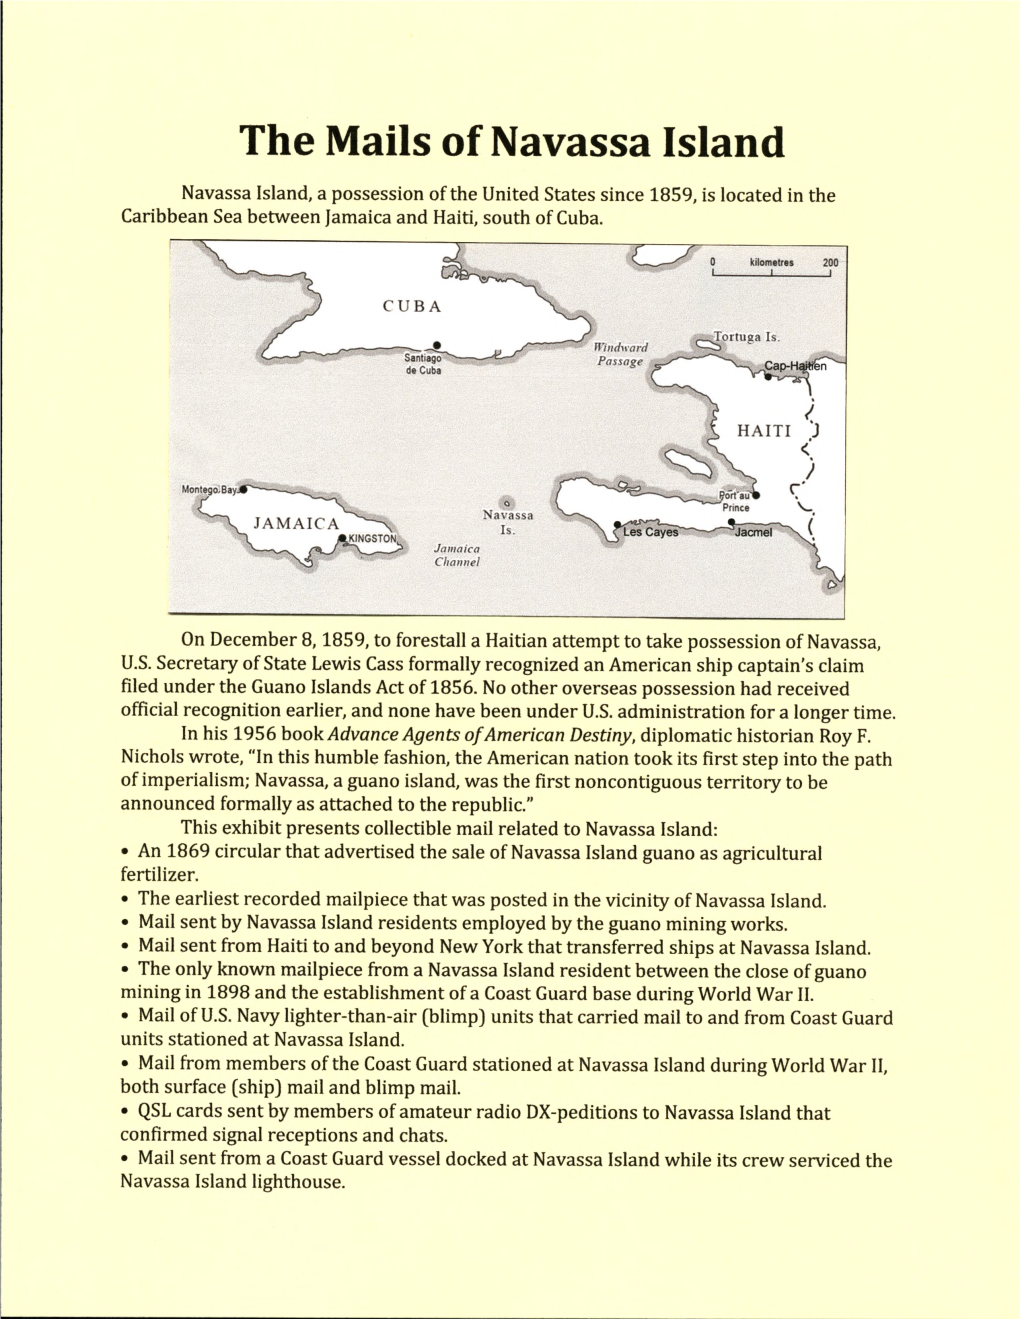 The Mails of Navassa Island Navassa Island, a Possession of the United States Since 1859, Is Located in the Caribbean Sea Between Jamaica and Haiti, South of Cuba